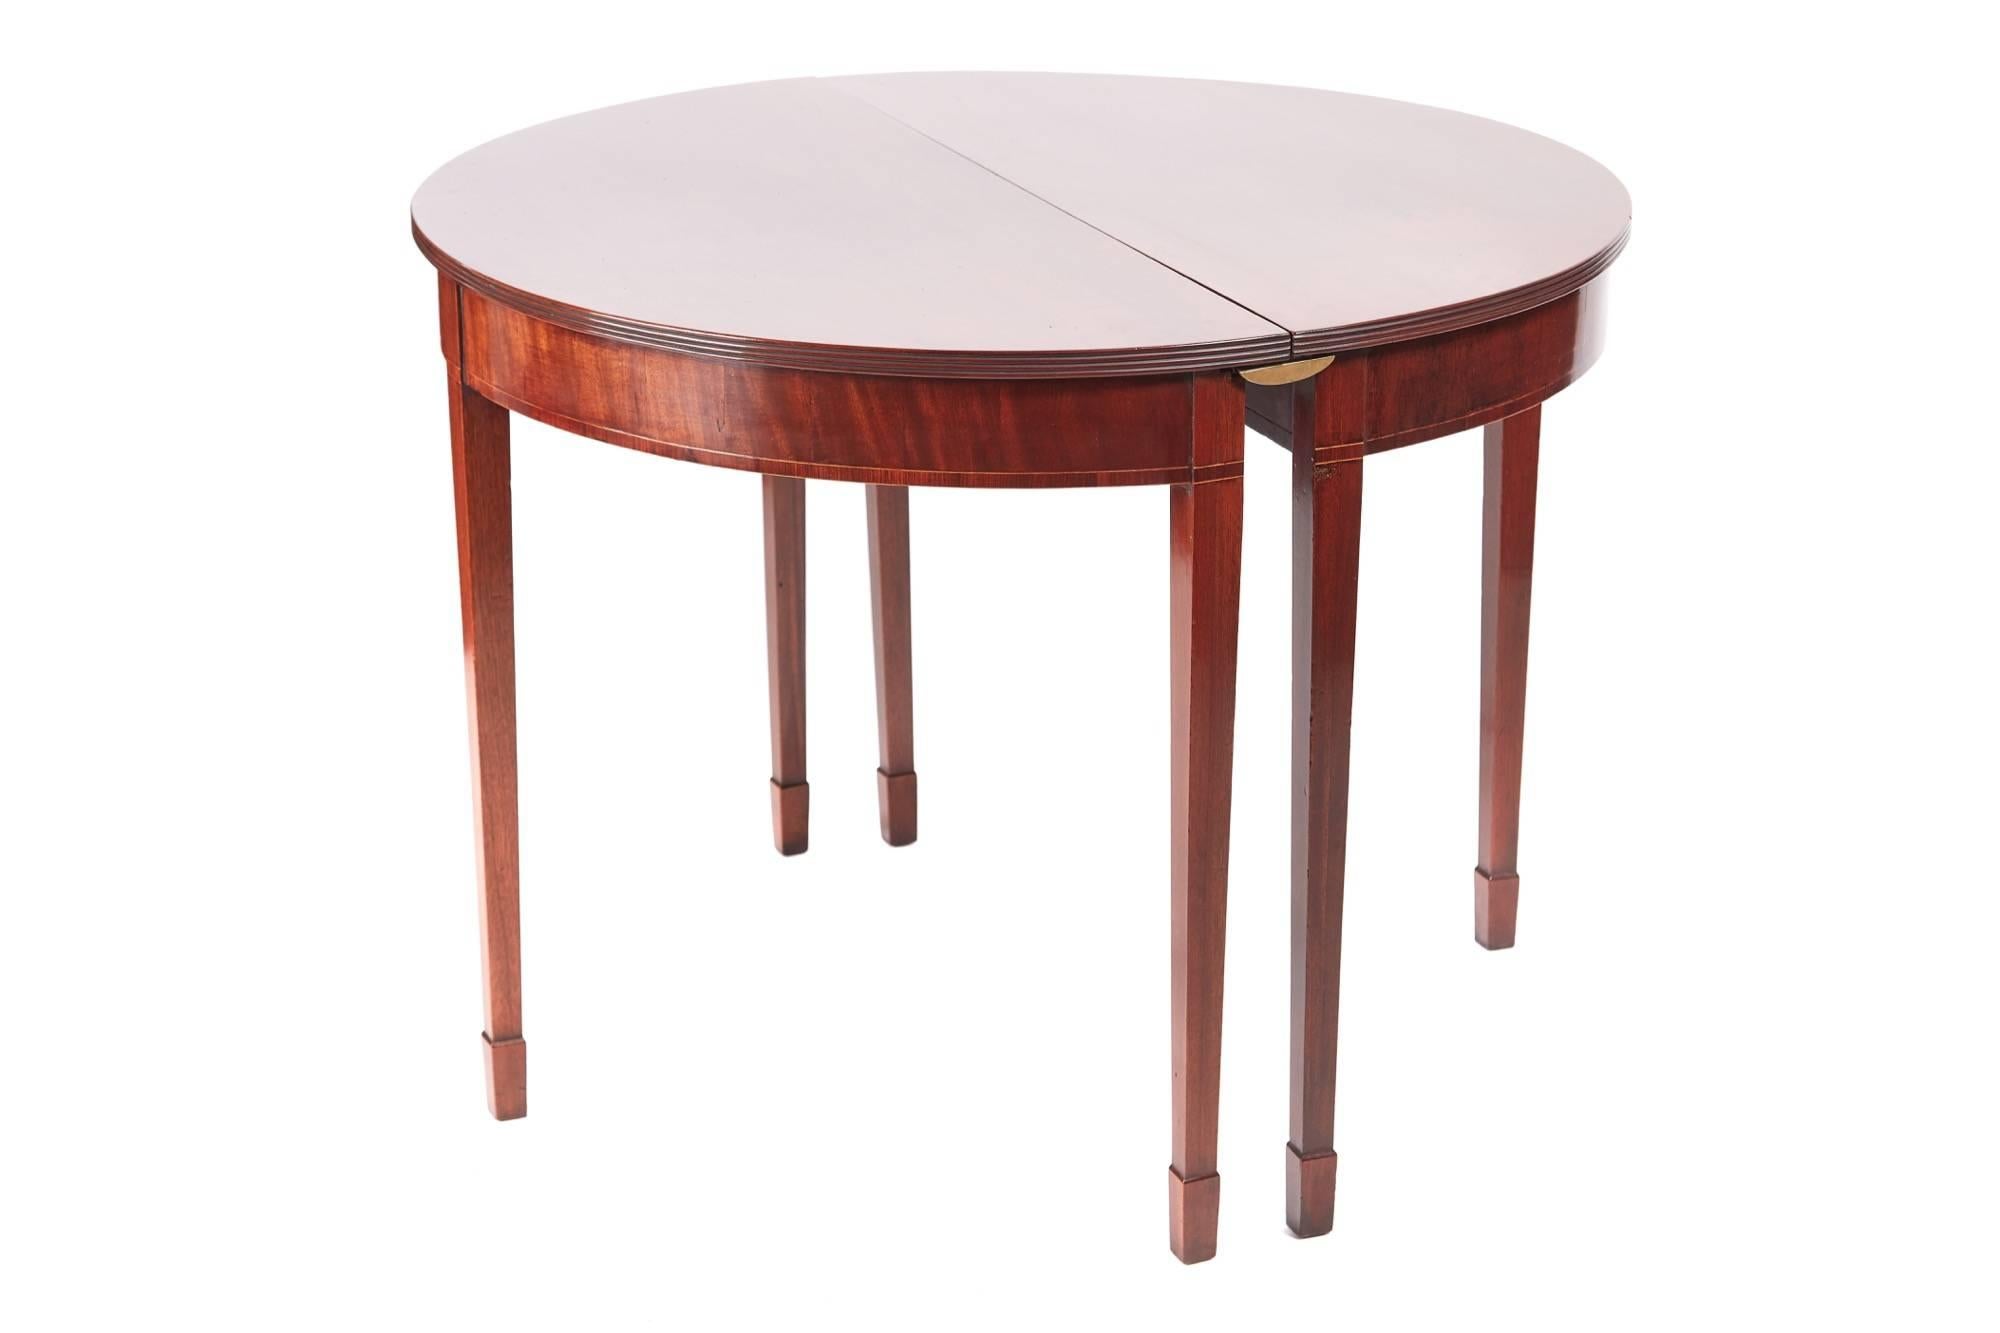 Unusual antique George III mahogany dining table, having a fantastic solid mahogany top with a reeded edge, lovely inlaid frieze, one extra leaf, standing on square tapering legs with spade feet
This table makes a round centre table
and a pair of